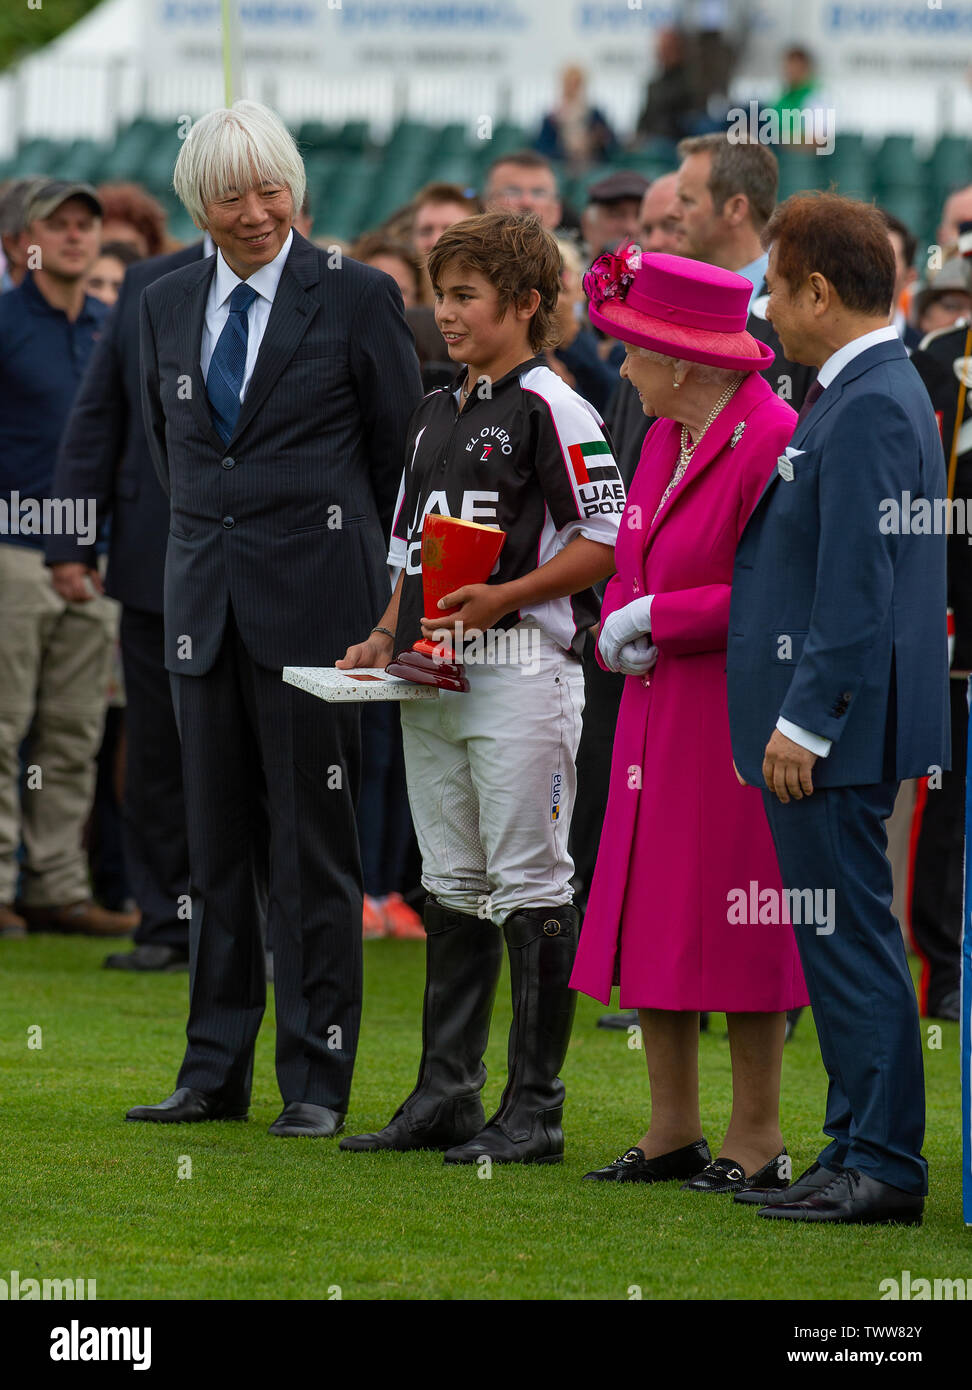 Windsor Great Park, Egham, Surrey, UK. 23rd June 2019. The player of the match in the Outsourcing! Inc Royal Windsor Cup Final, Lucas Monteverde Jnr, poses for a photograph with Her Majesty the Queen after the Guards Polo Club. Credit: Maureen McLean/Alamy Live News Stock Photo